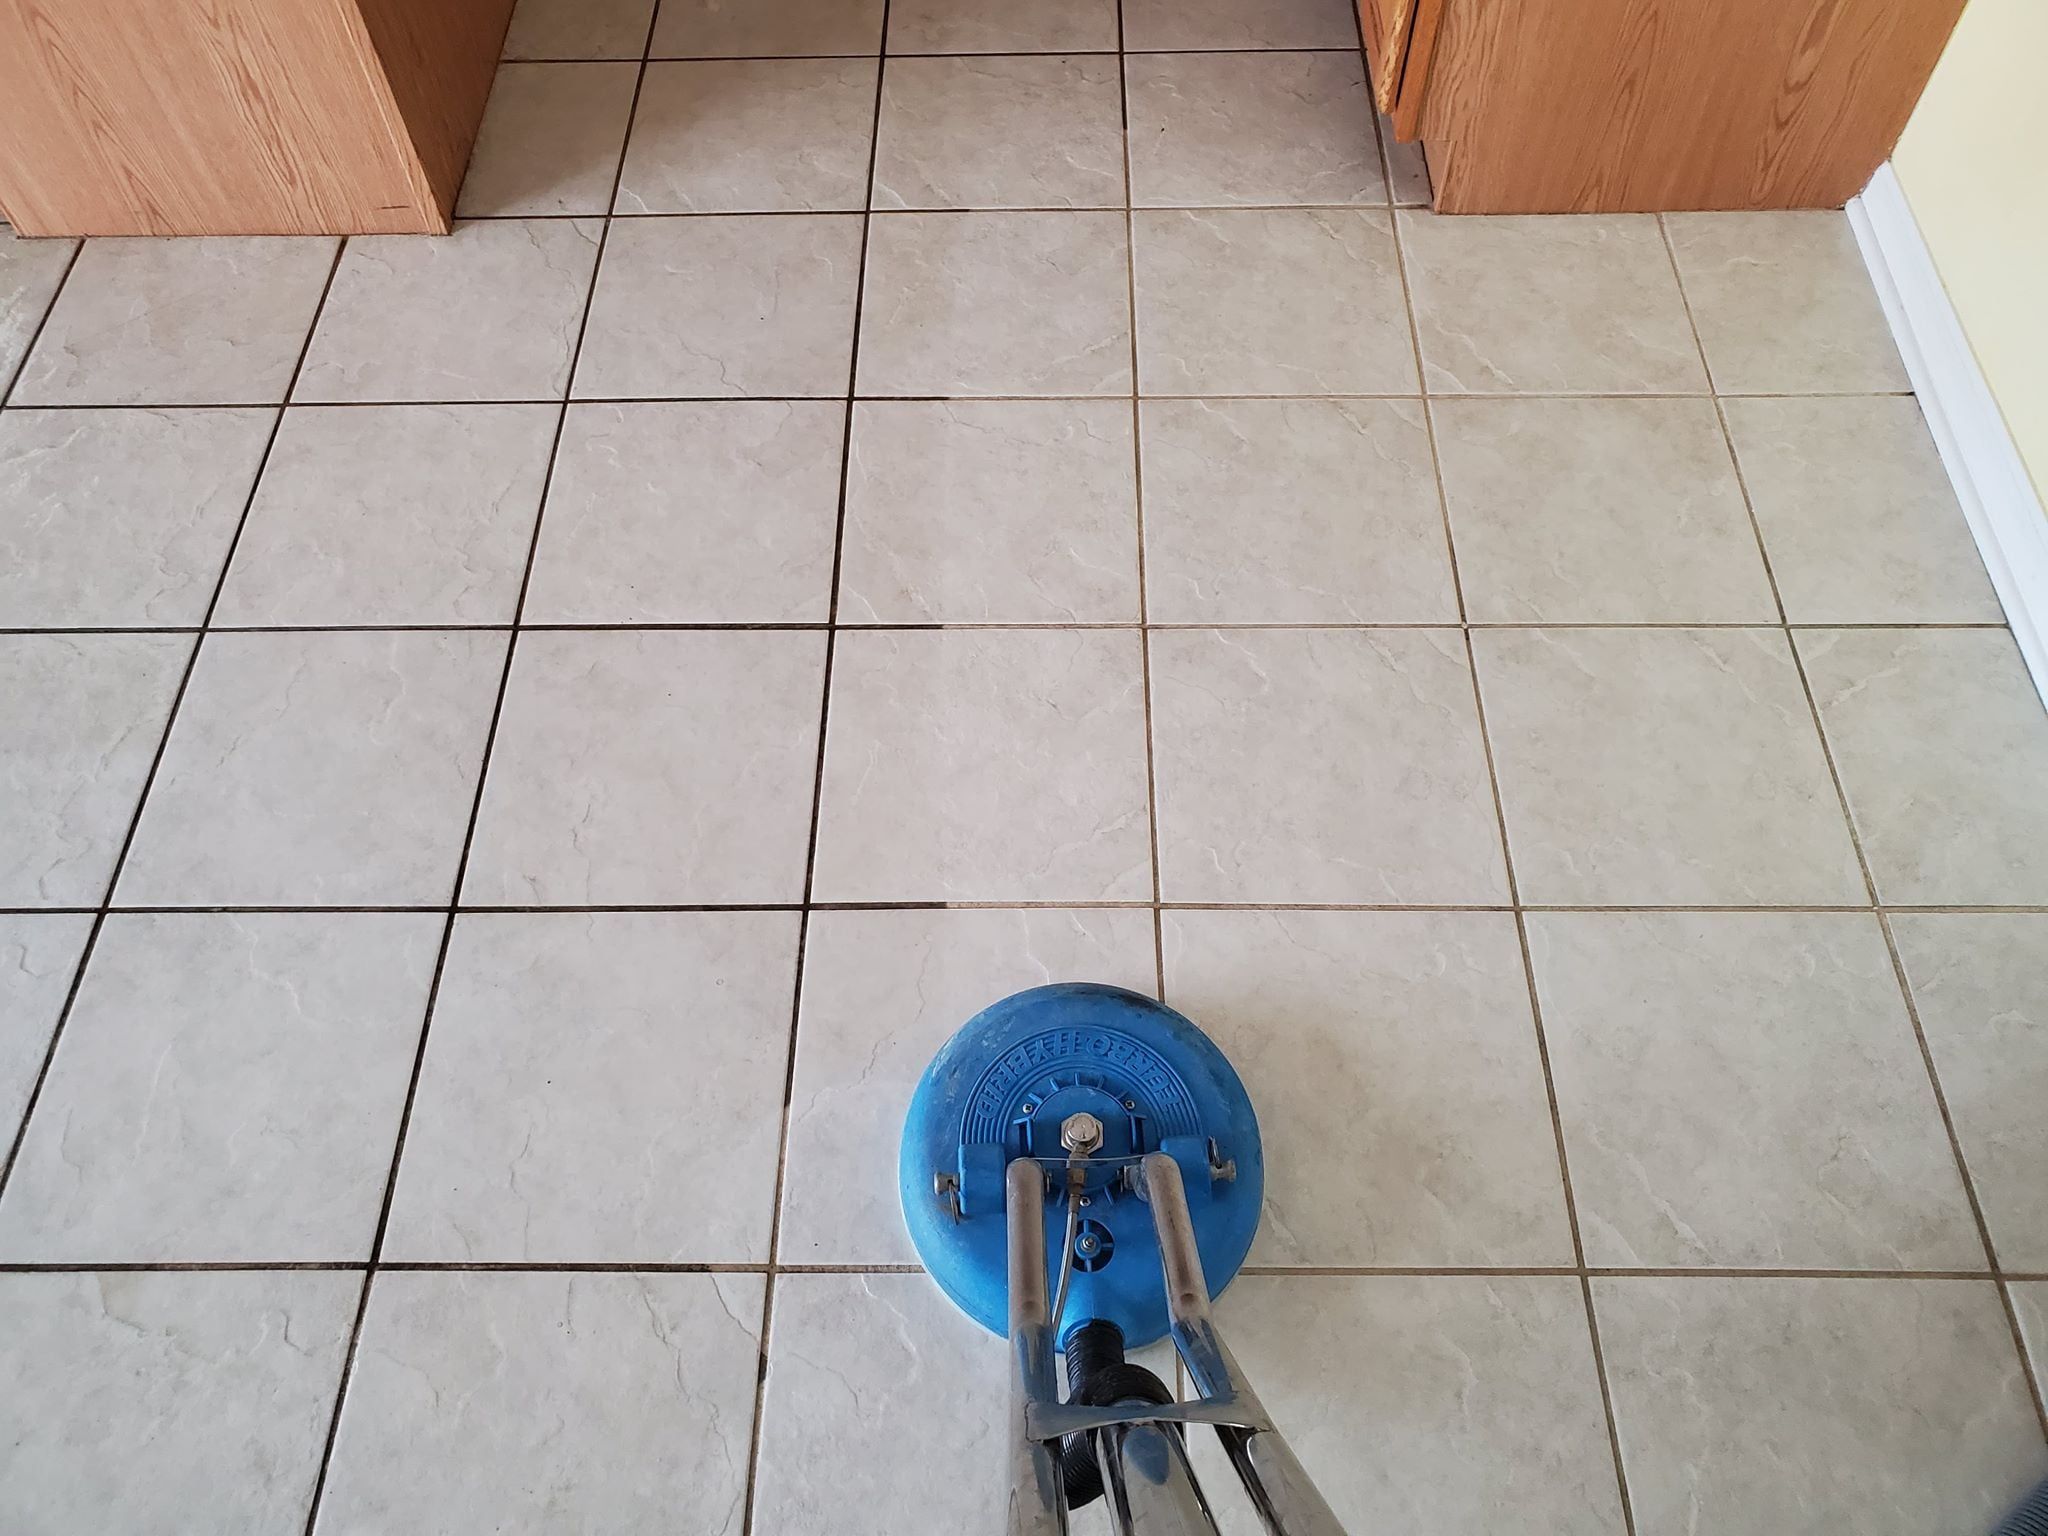 Tampa Tile and Grout Cleaning by Tampa Steam Team